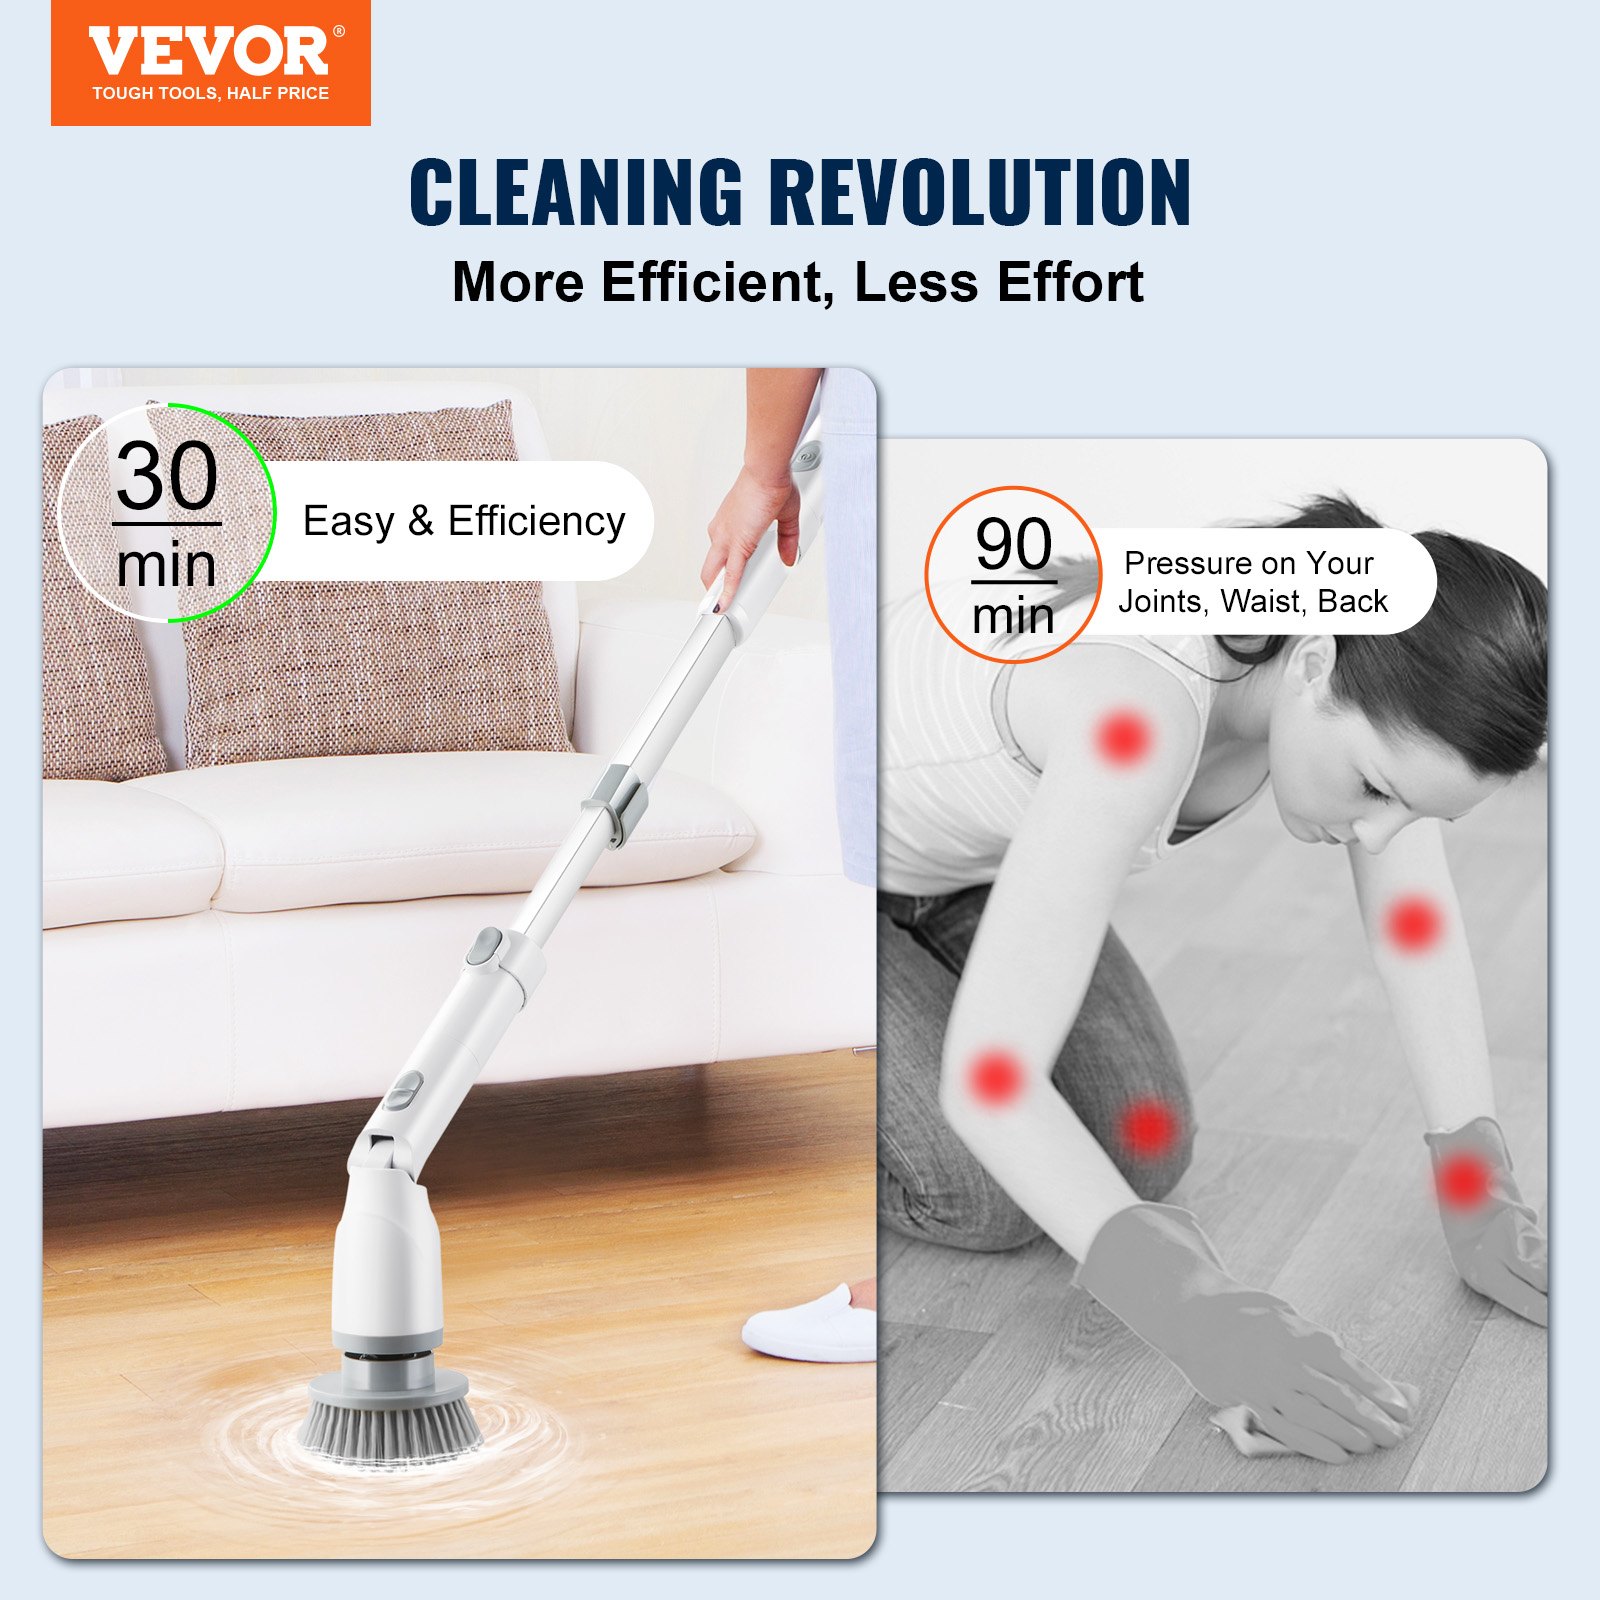 VEVOR motorized, battery-powered scrubber will be a useful help especially in the bathroom